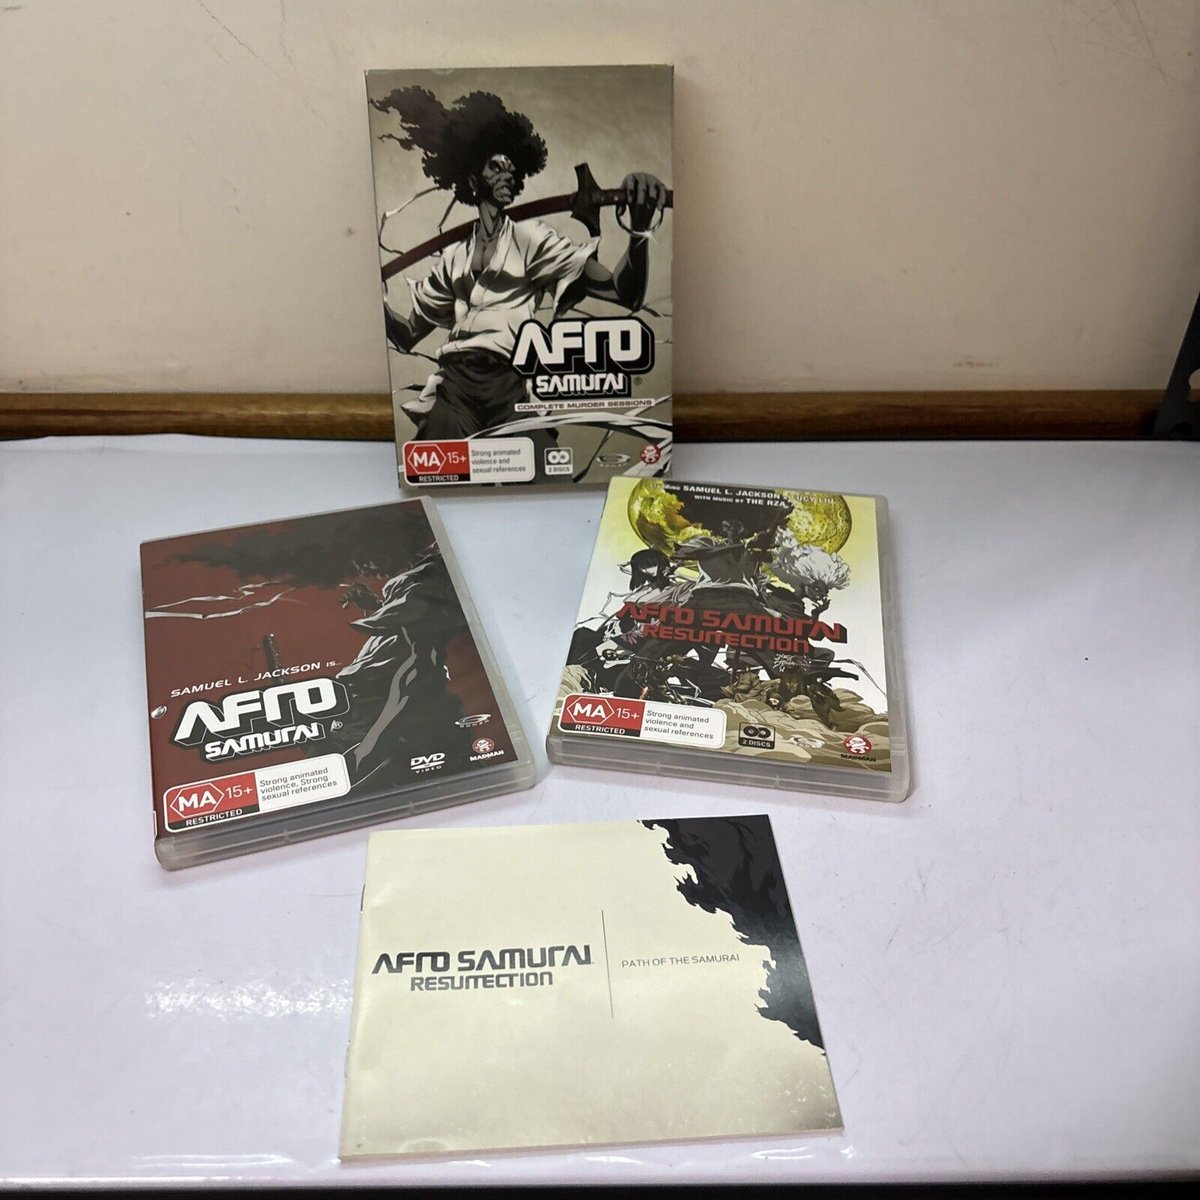 The Afro Samurai - The Complete Murder Sessions (DVD) is a must-have for fans of the Afro Samurai series.  
#AfroSamurai
#SamuelLJackson
#Anime
#Samurai
#Revenge 
retrounit.com.au/products/afro-…